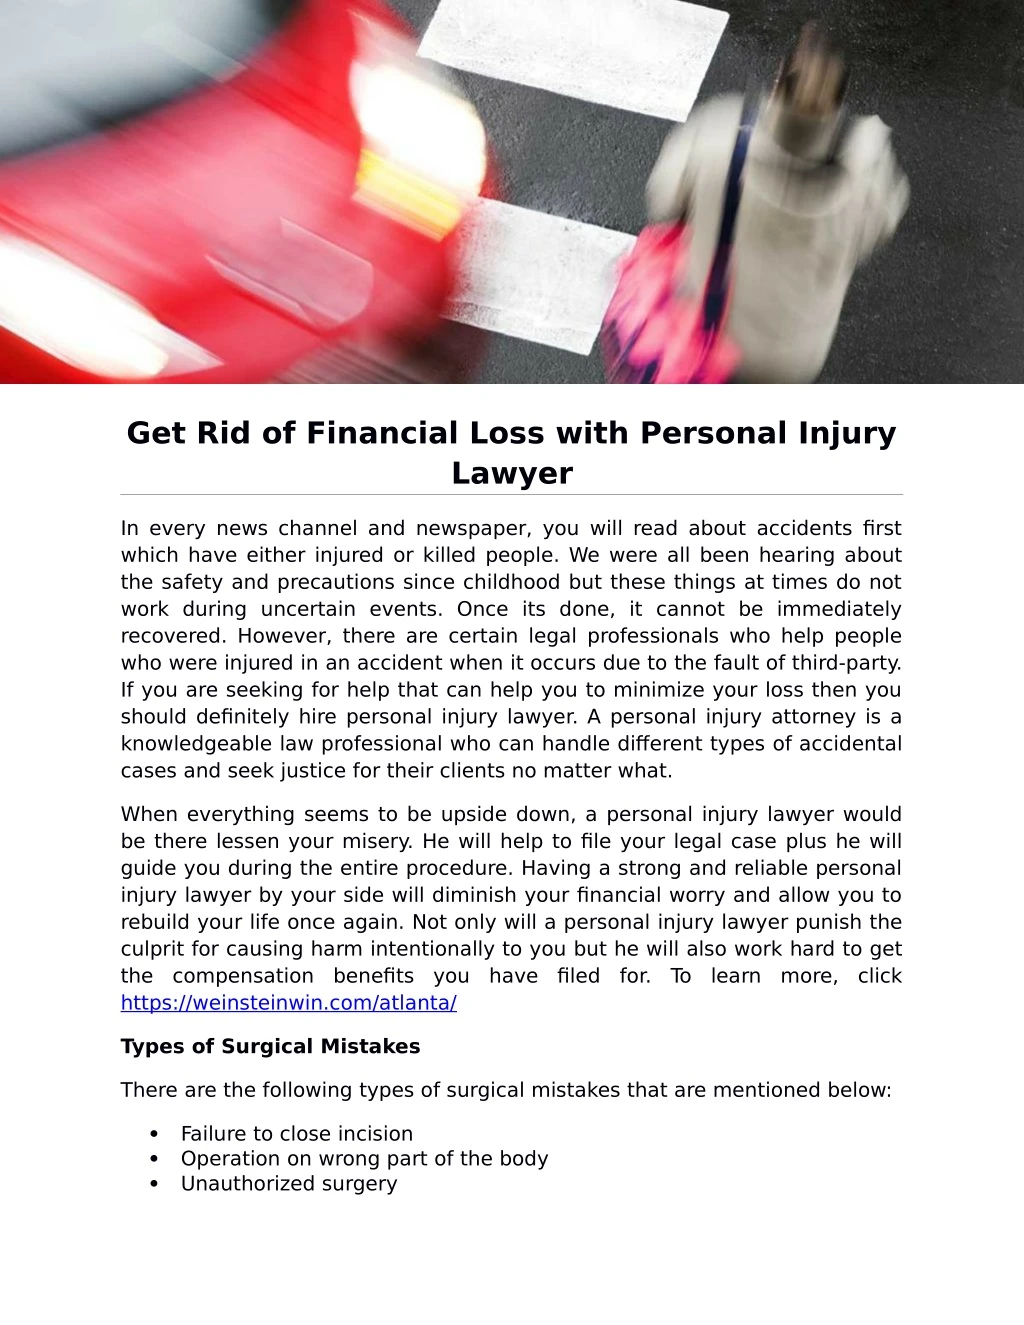 get rid of financial loss with personal injury